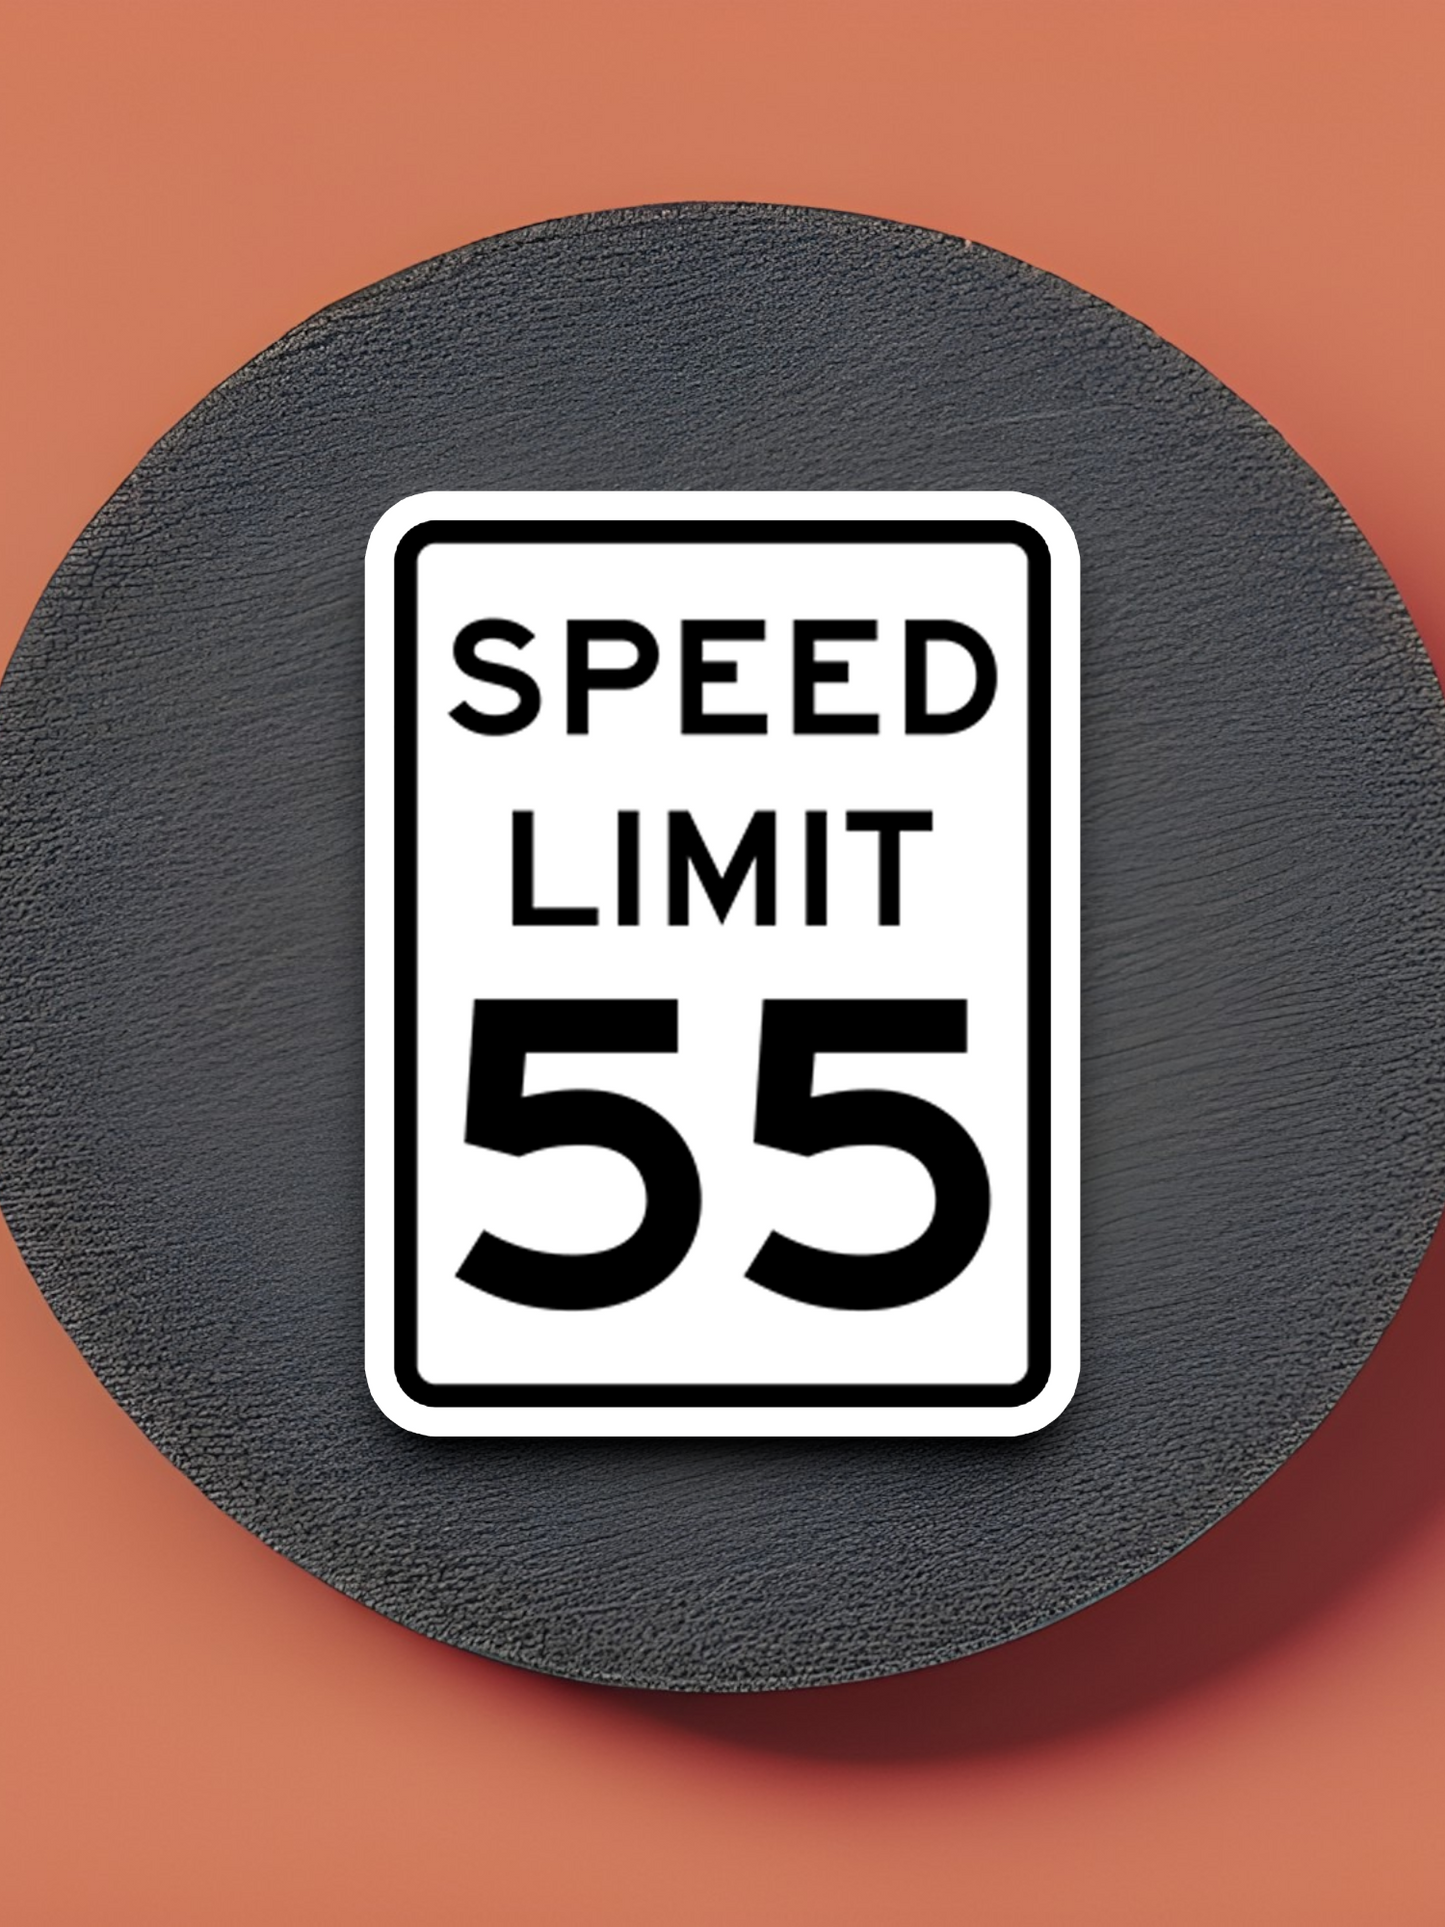 55 Miles Per Hour Speed Limit Road Sign Sticker